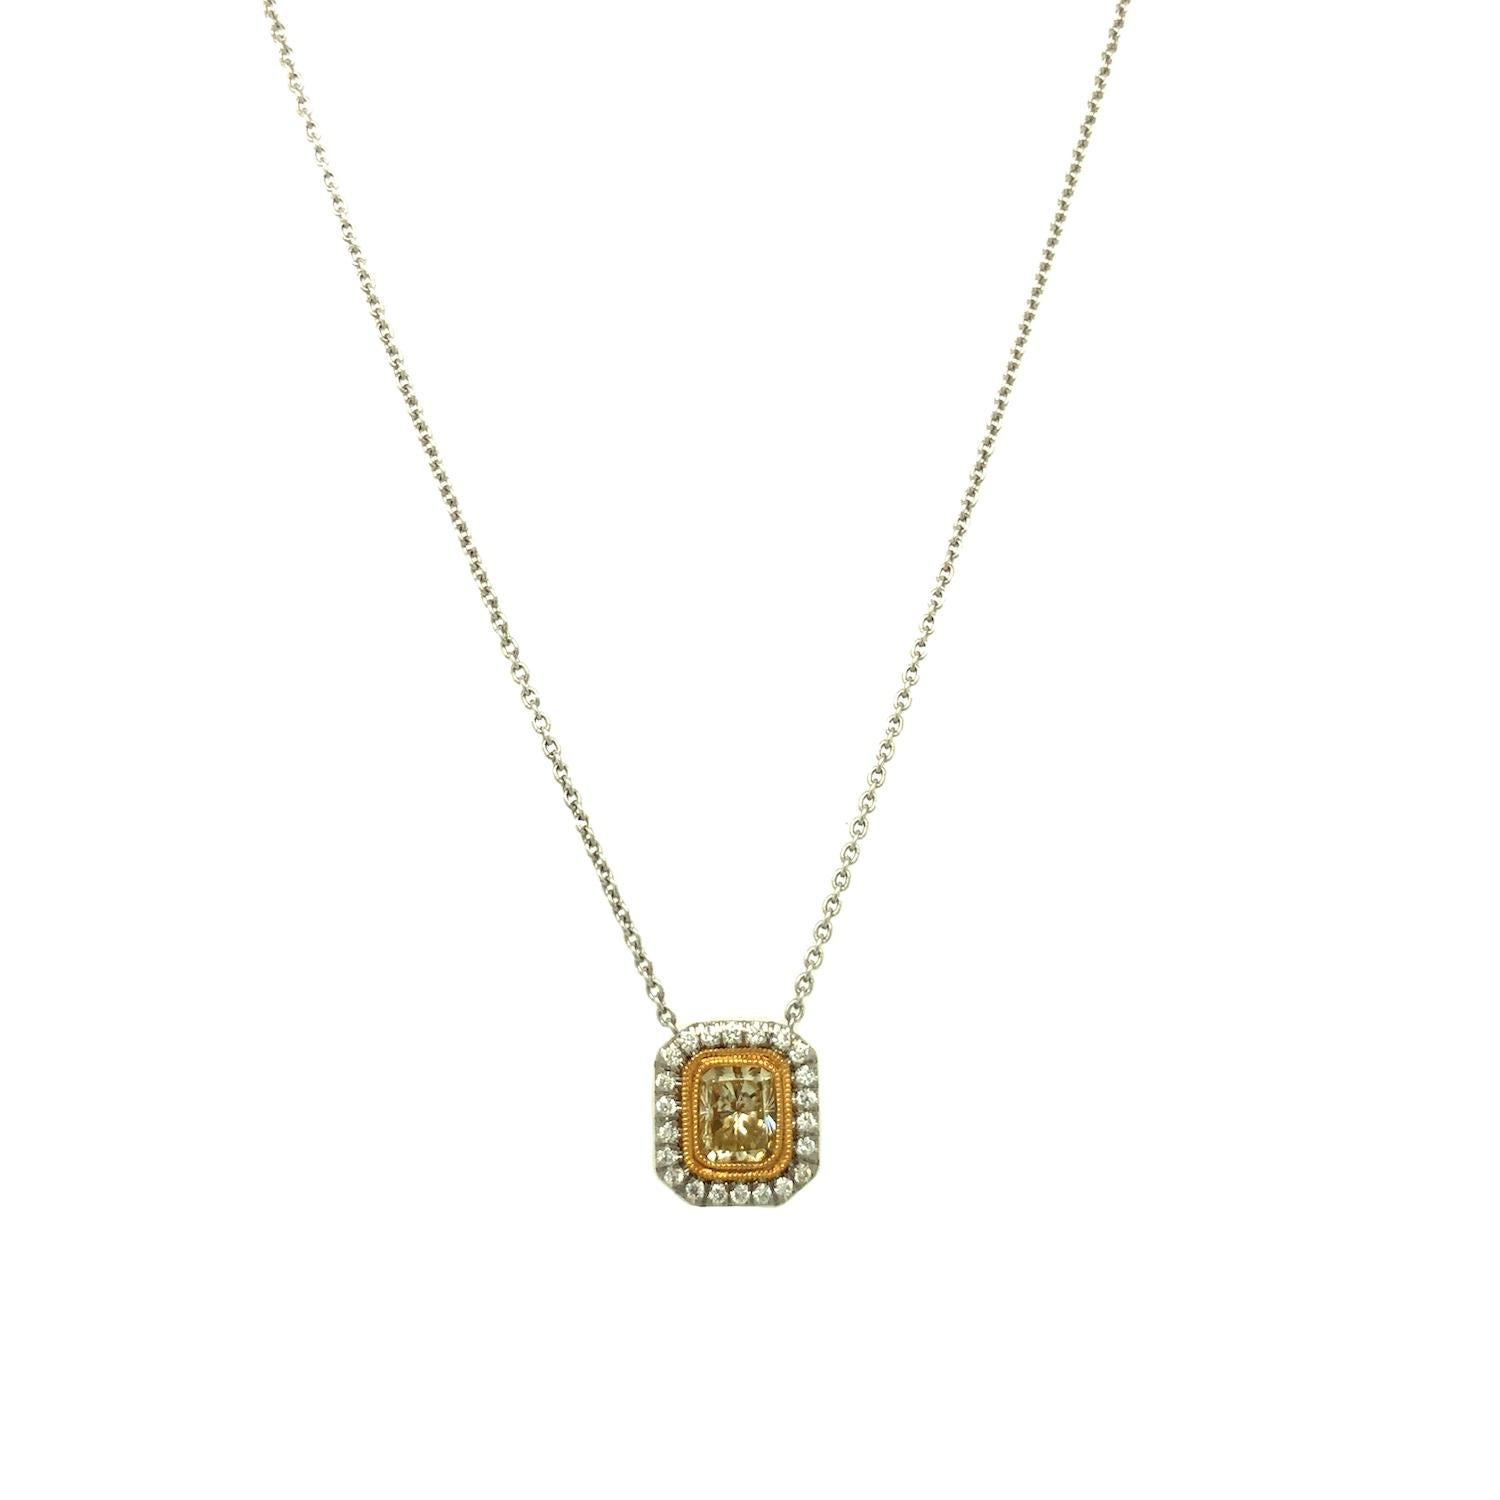 Radiant Cut Gems Are Forever 0.75 Carat Yellow Diamond and Diamond Halo Necklace Platinum For Sale